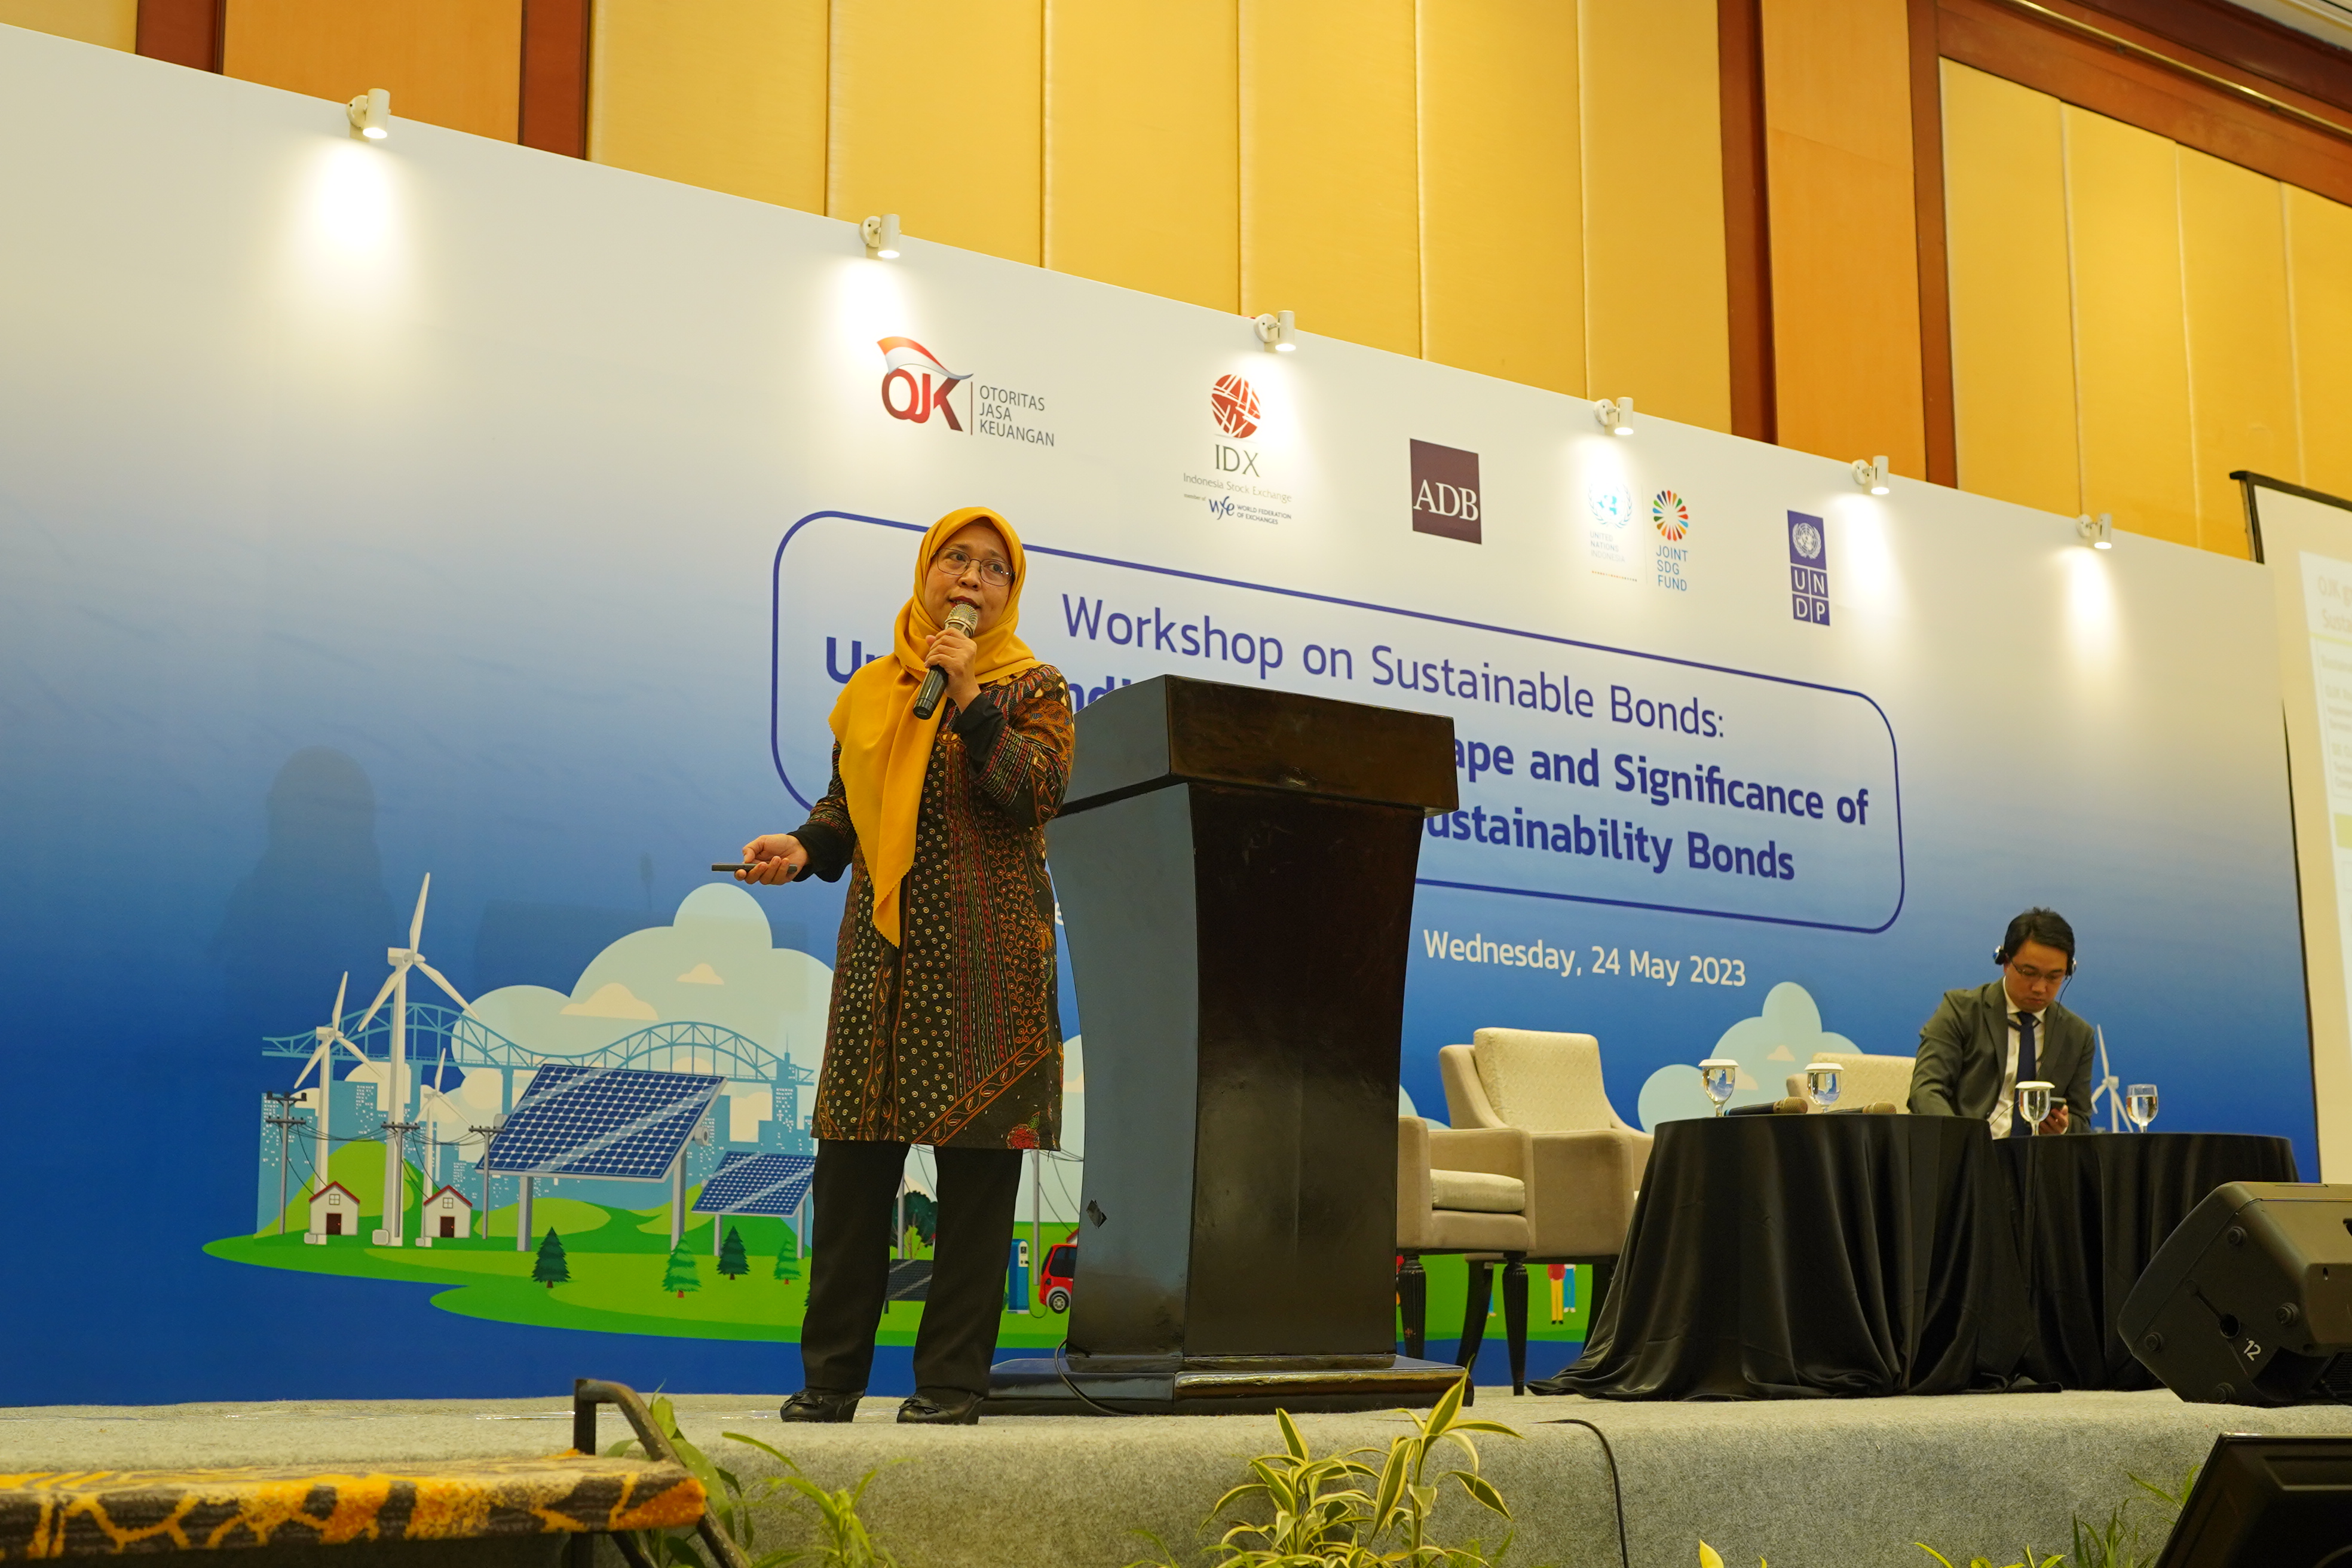 Latifah Hanum, Listing Services and Development Expert of Indonesia Stock Exchange, presenting about the domestic GSS bond market landscape